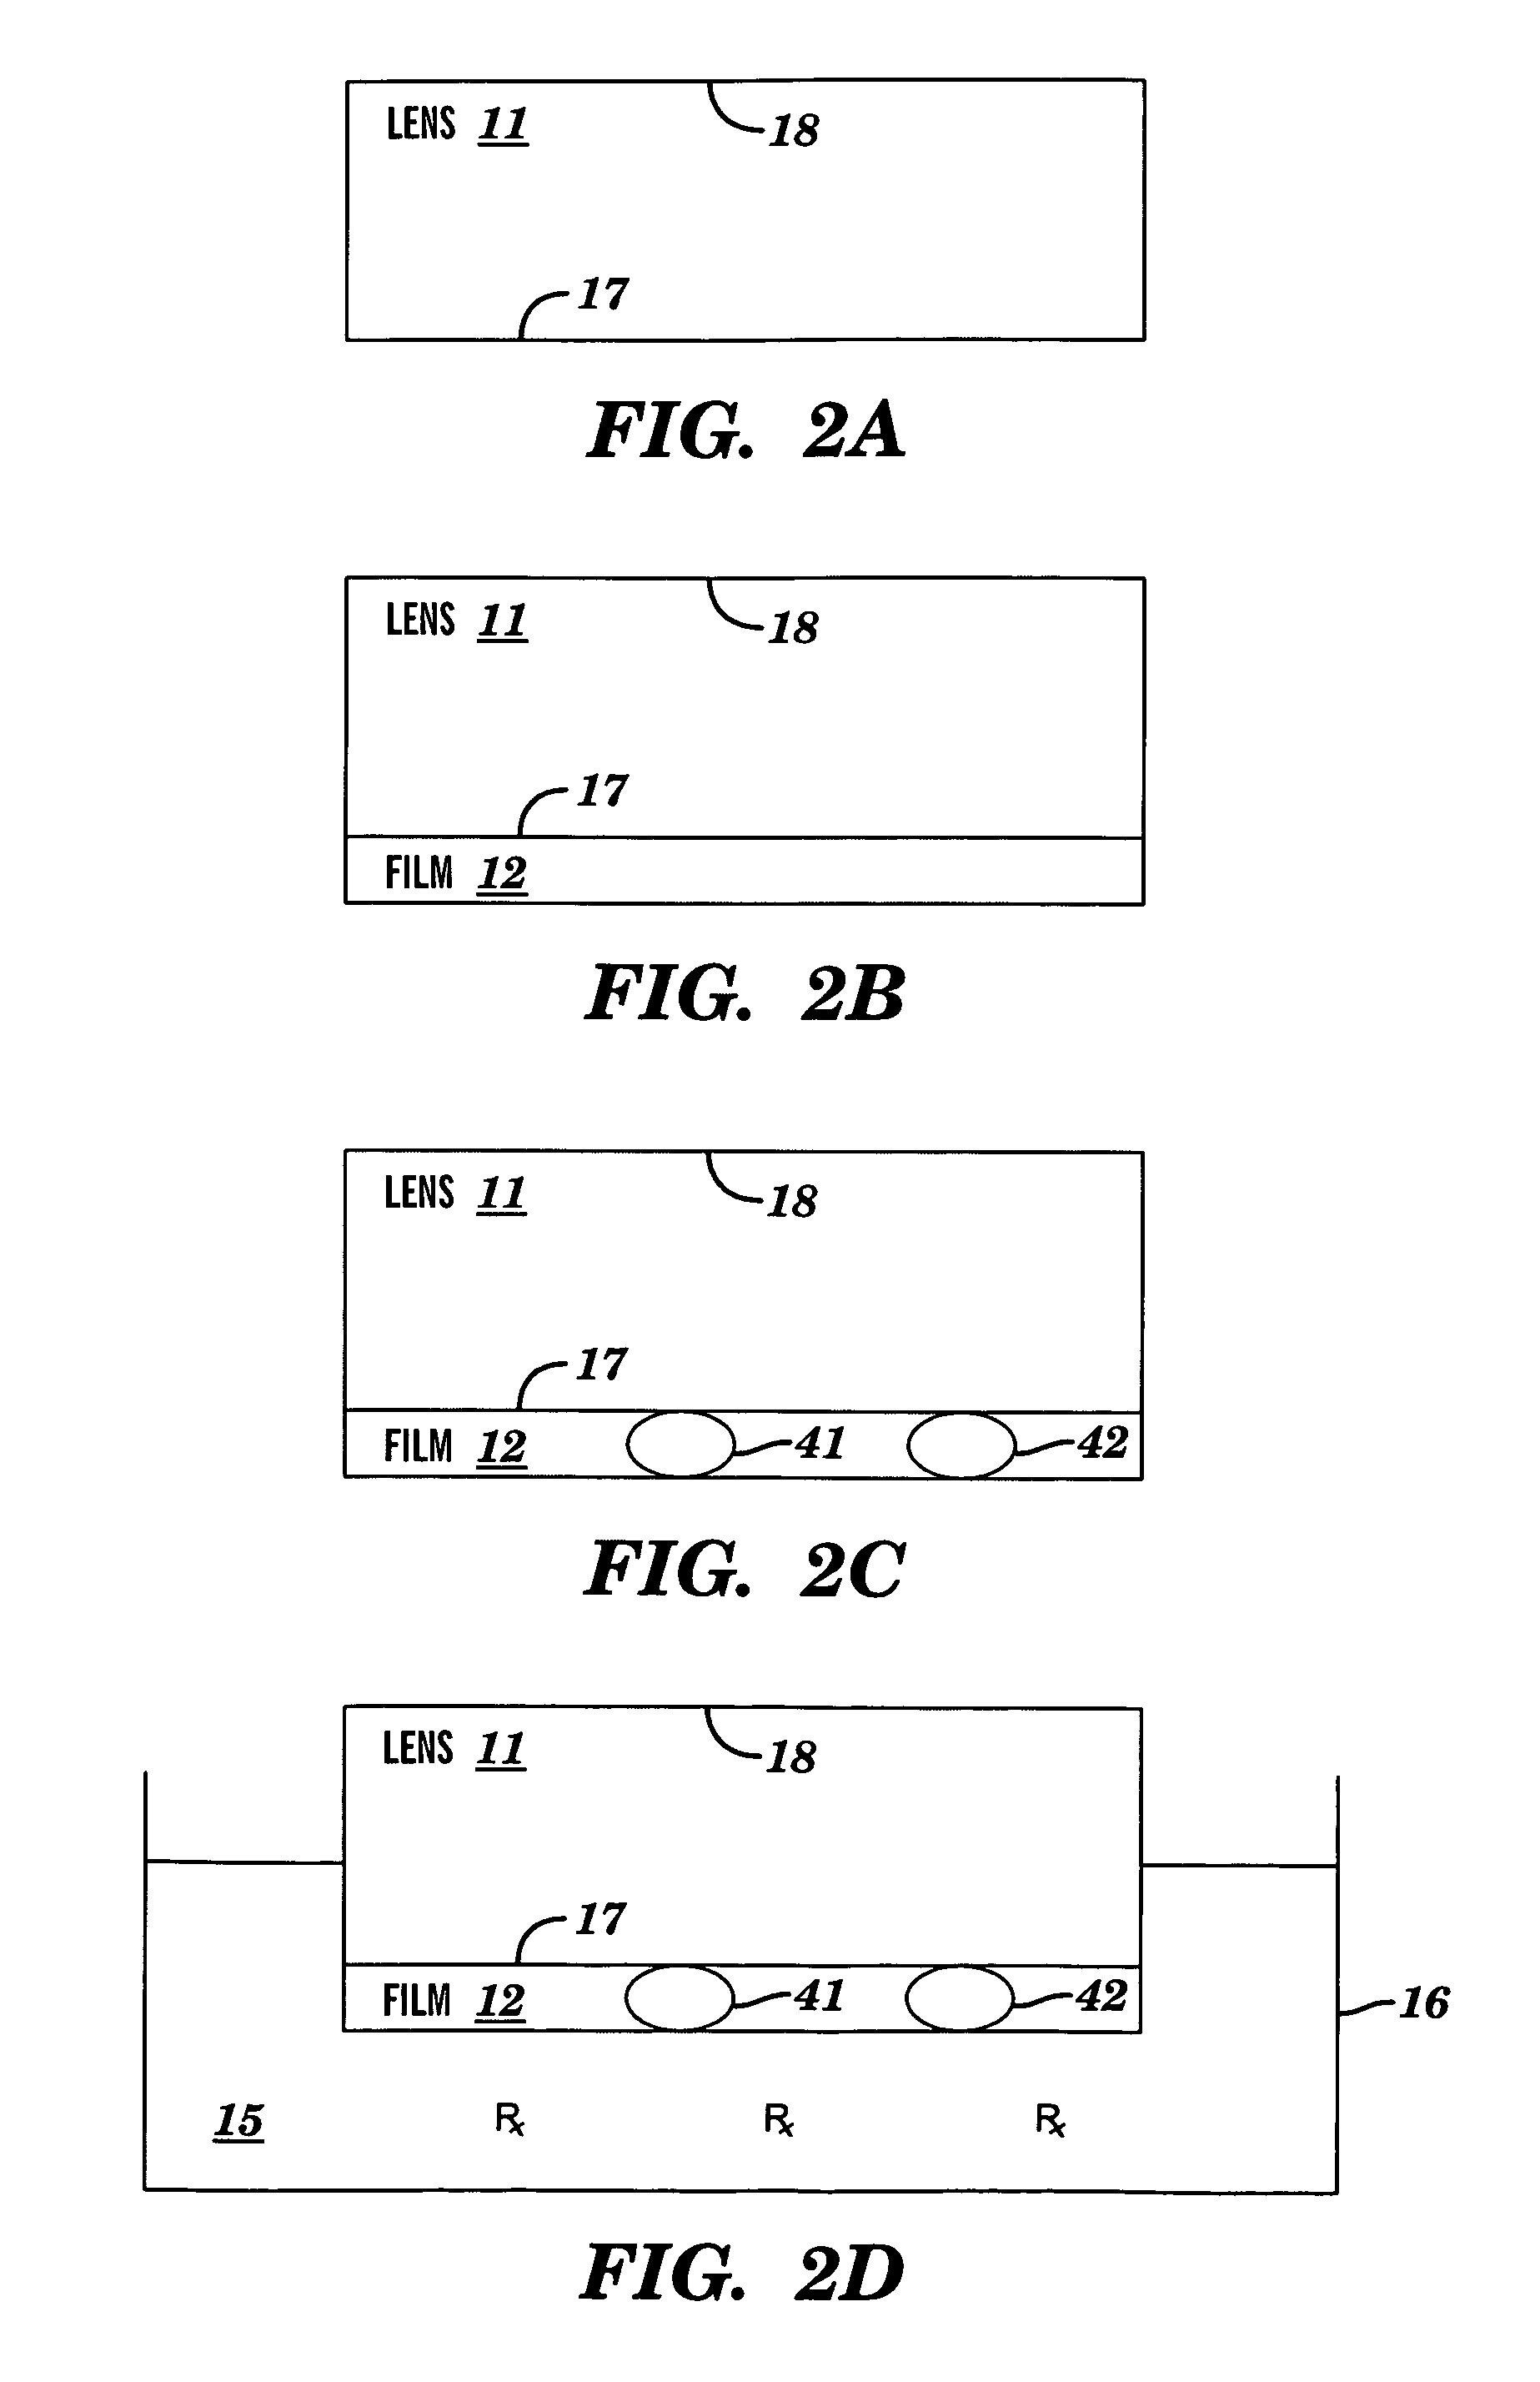 Method and system with contact lens product for treating and preventing adverse eye conditions